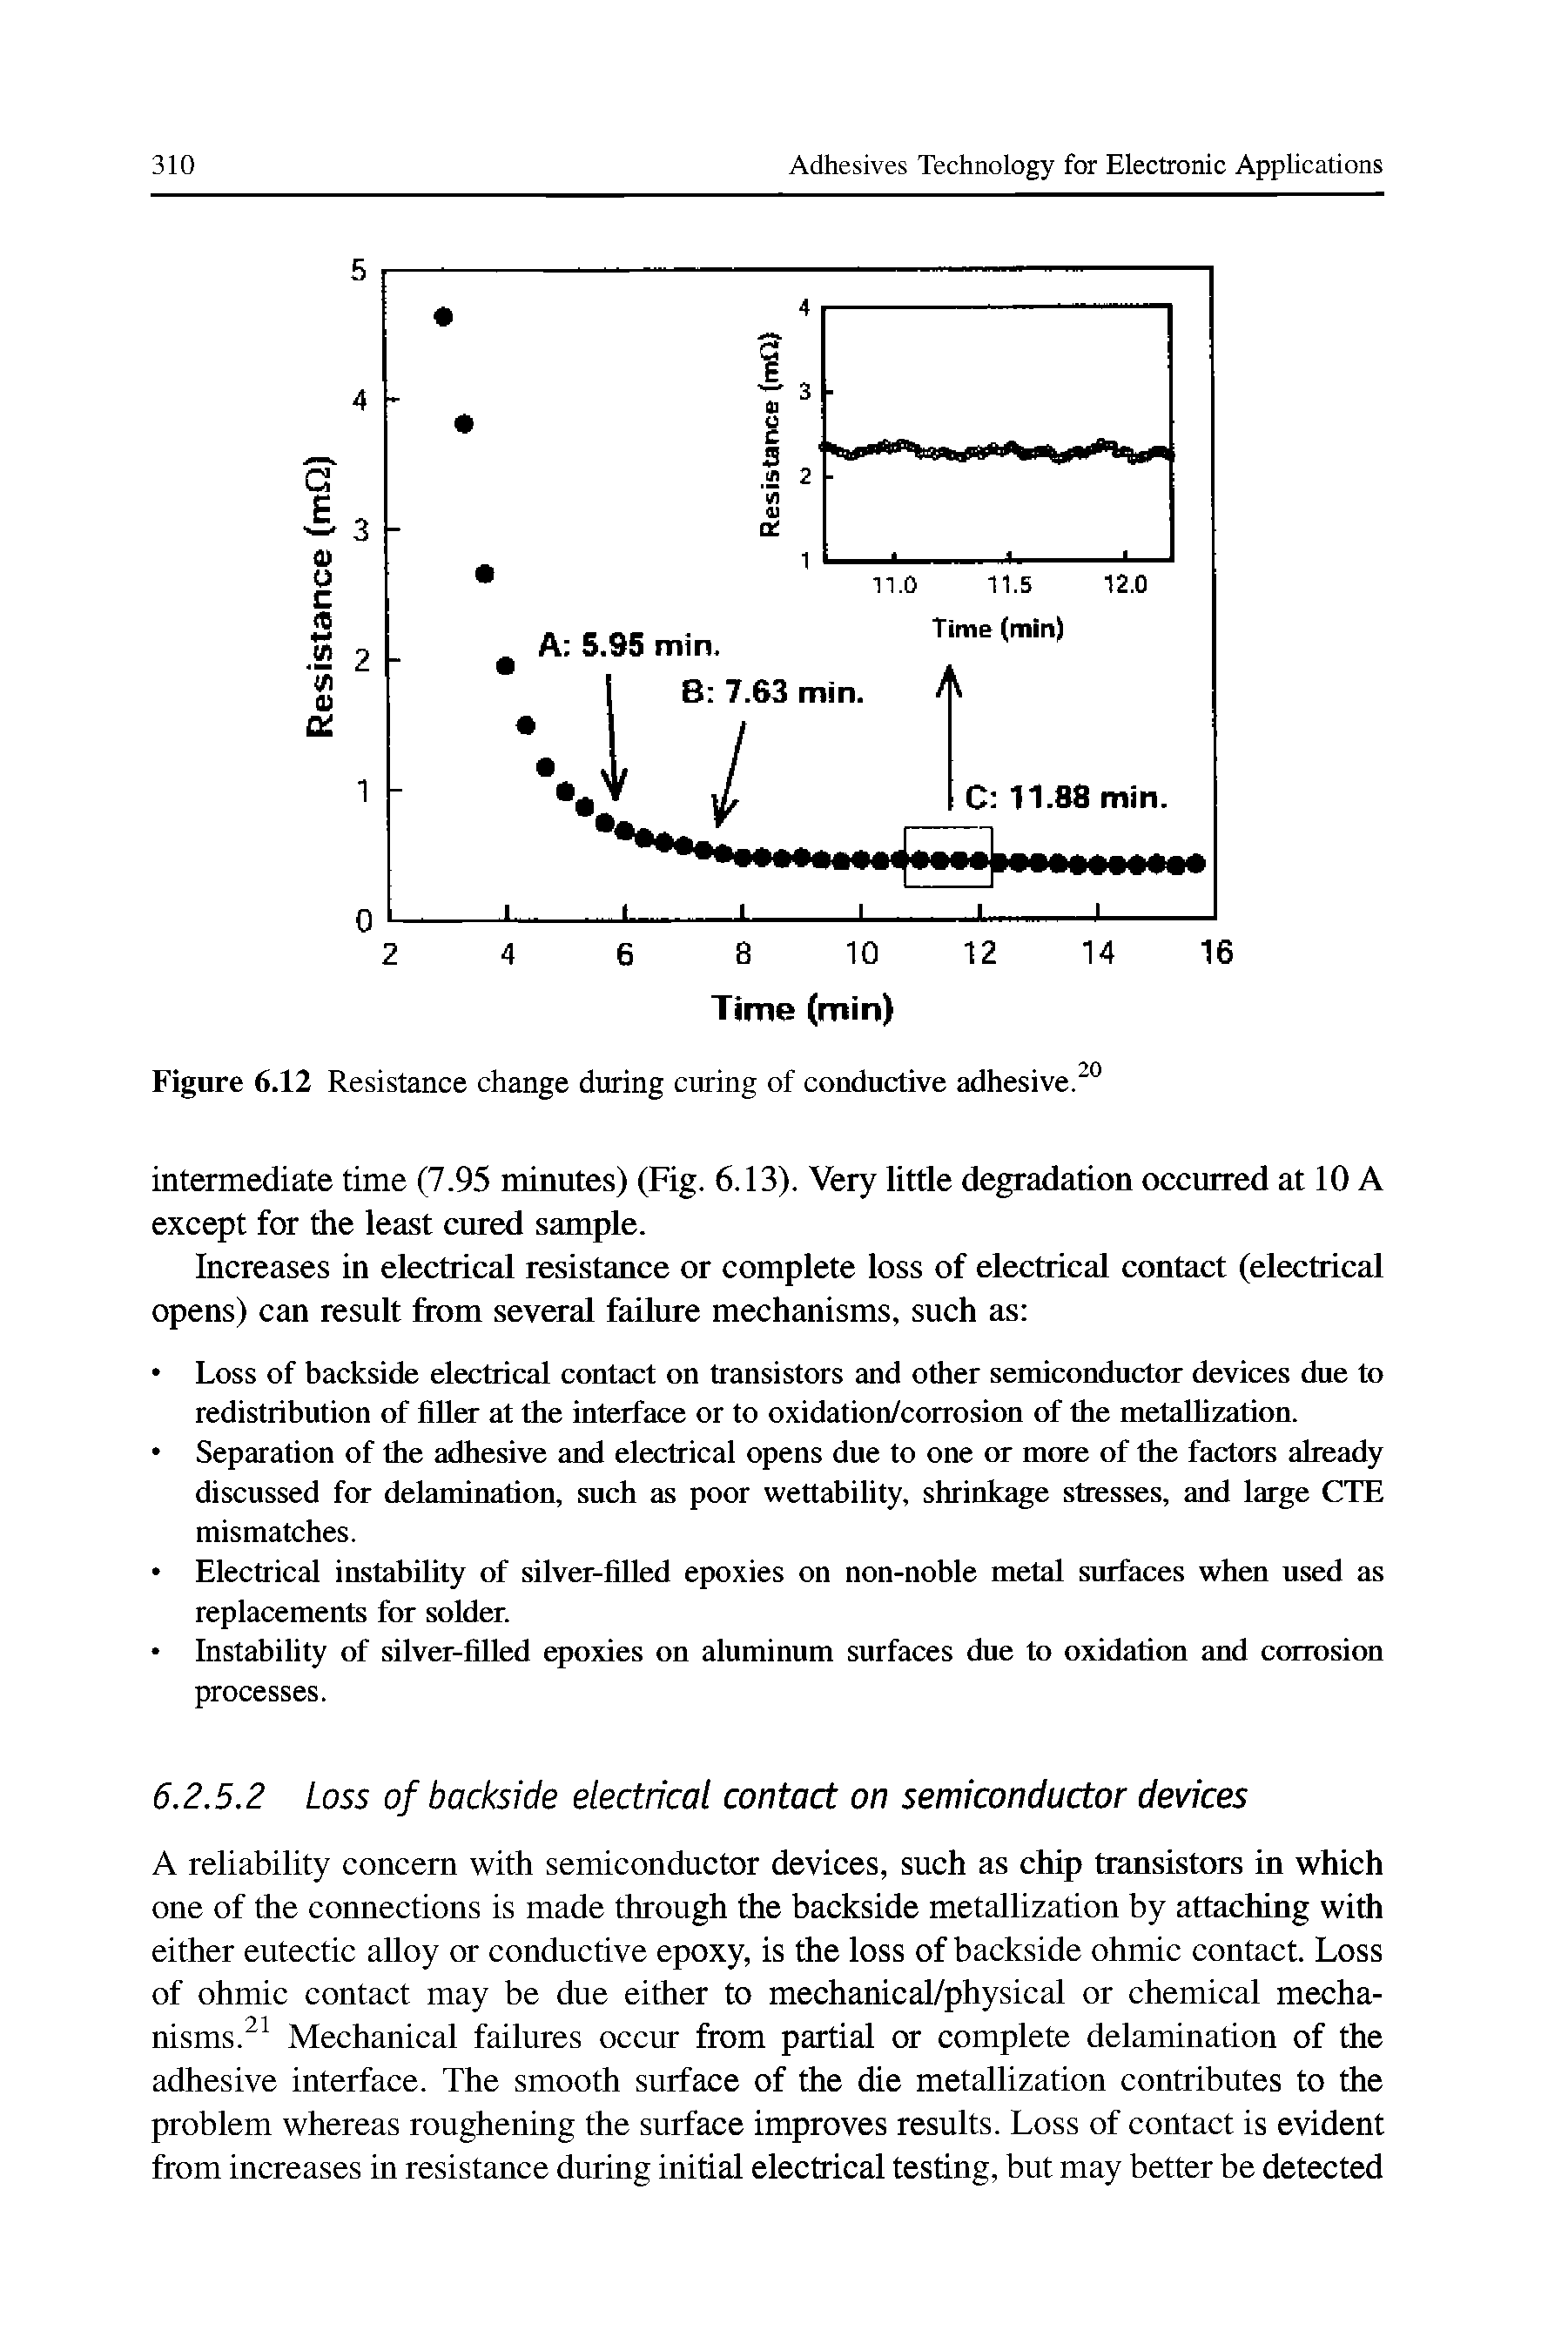 Figure 6.12 Resistance change during curing of conductive adhesive.